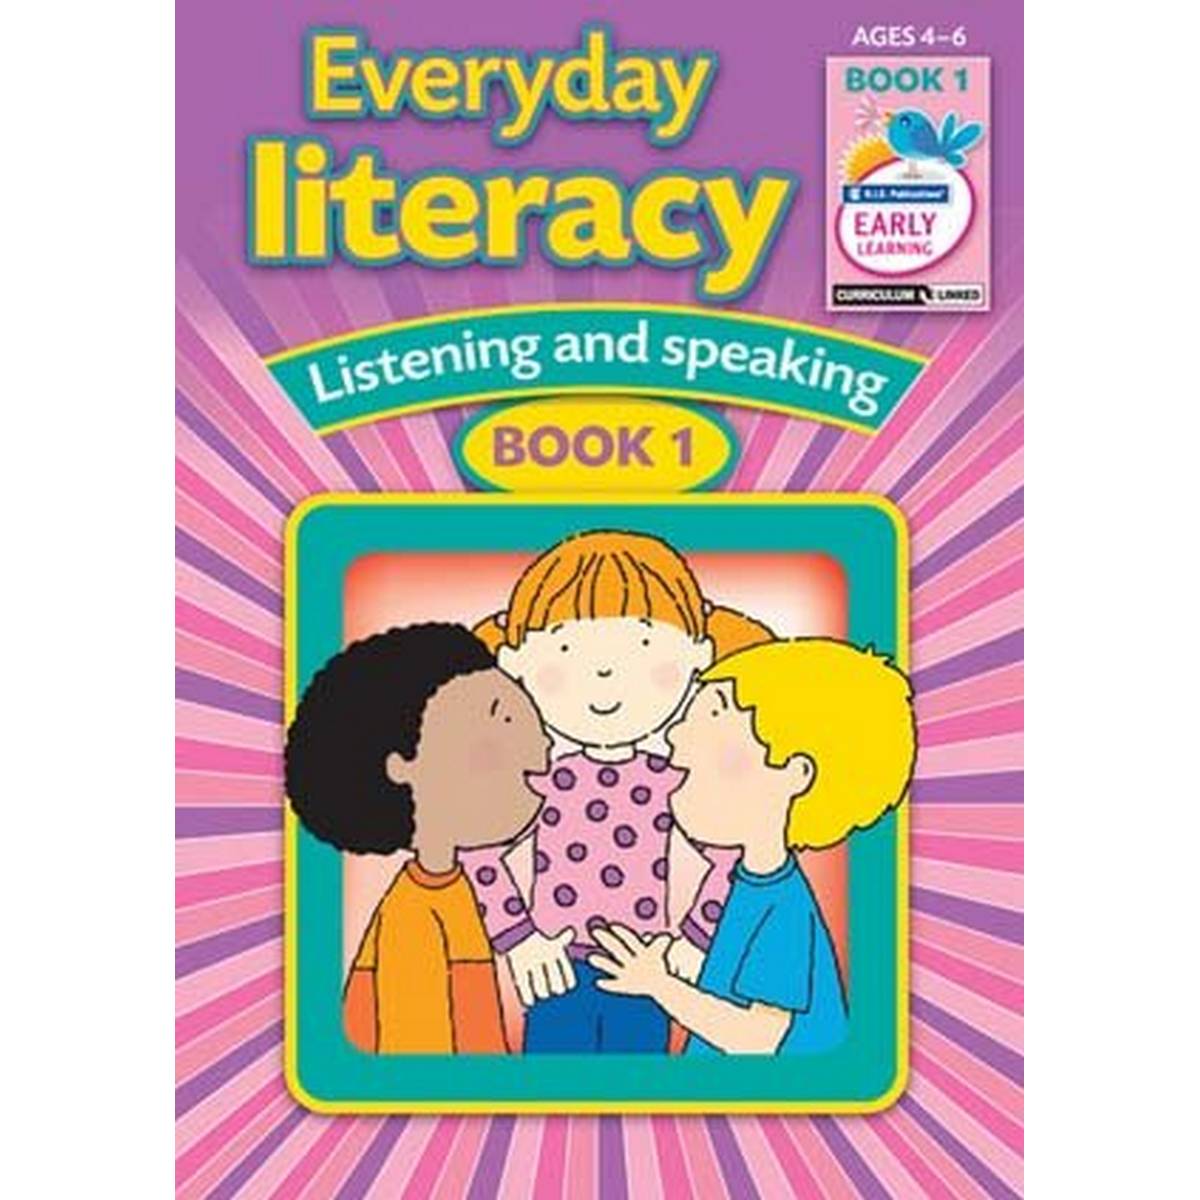 Everyday literacy: Speaking and listening - Book 1 (Ages 4-6)